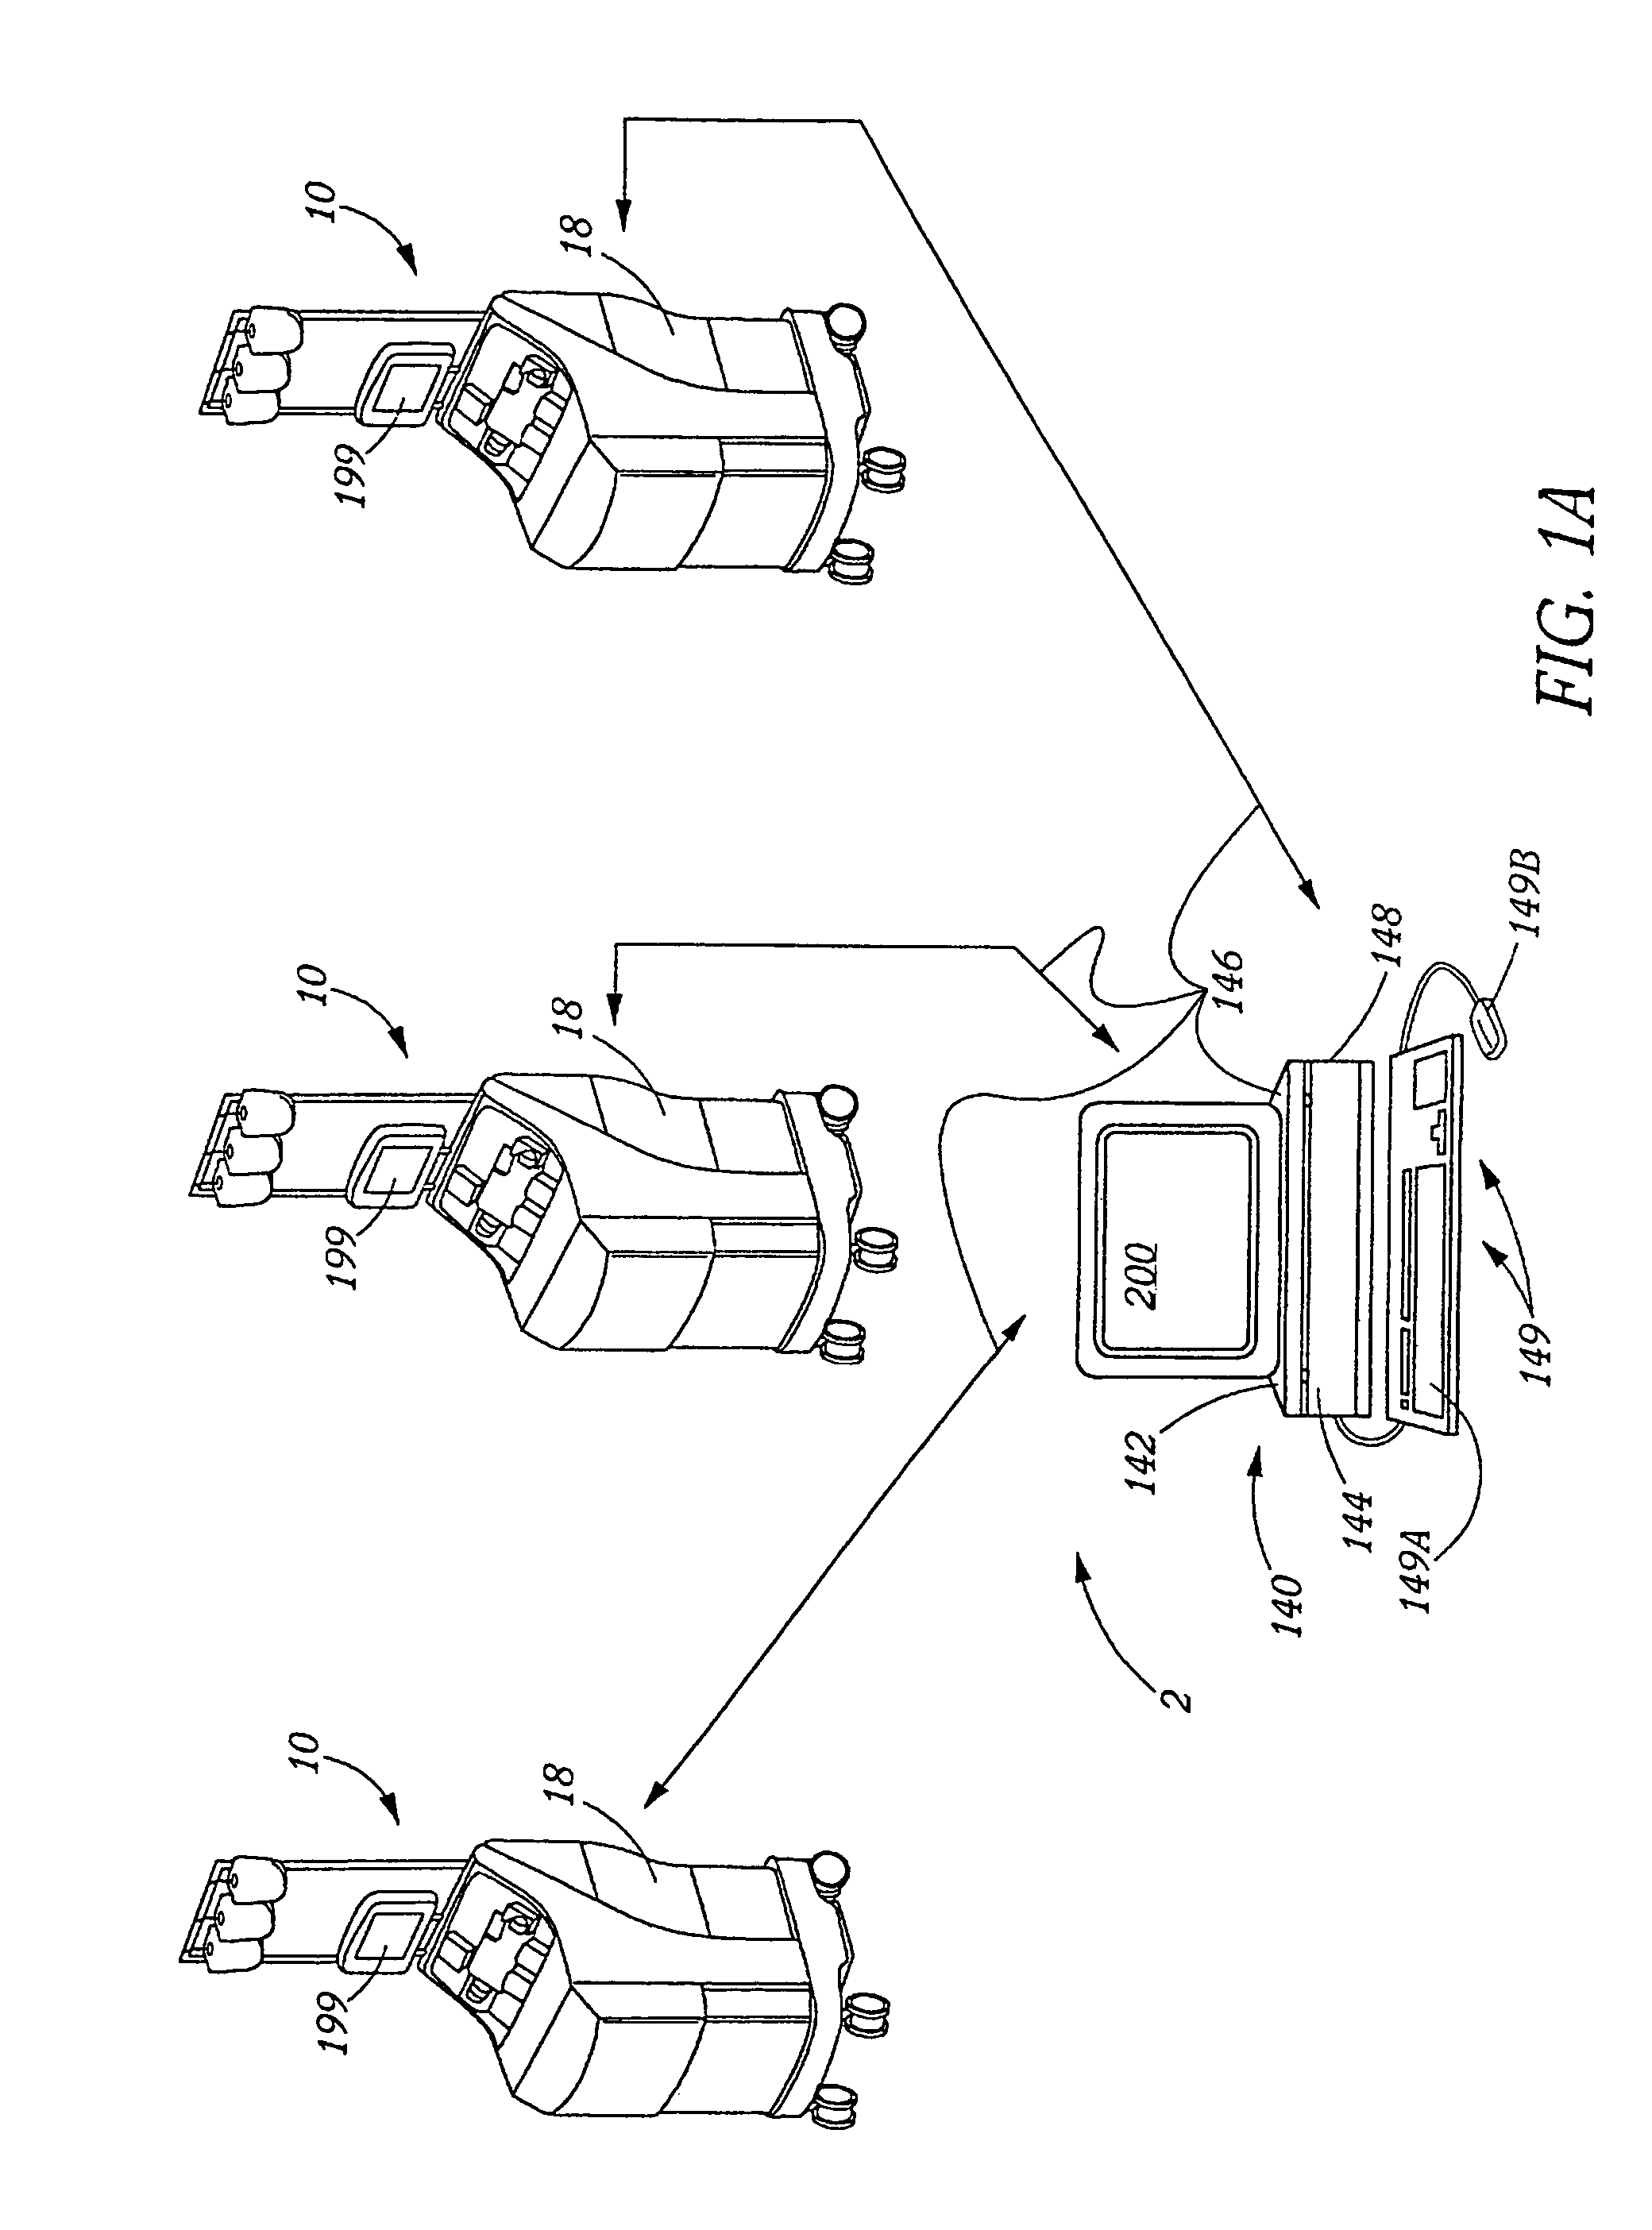 Blood processing information system with blood loss equivalency tracking